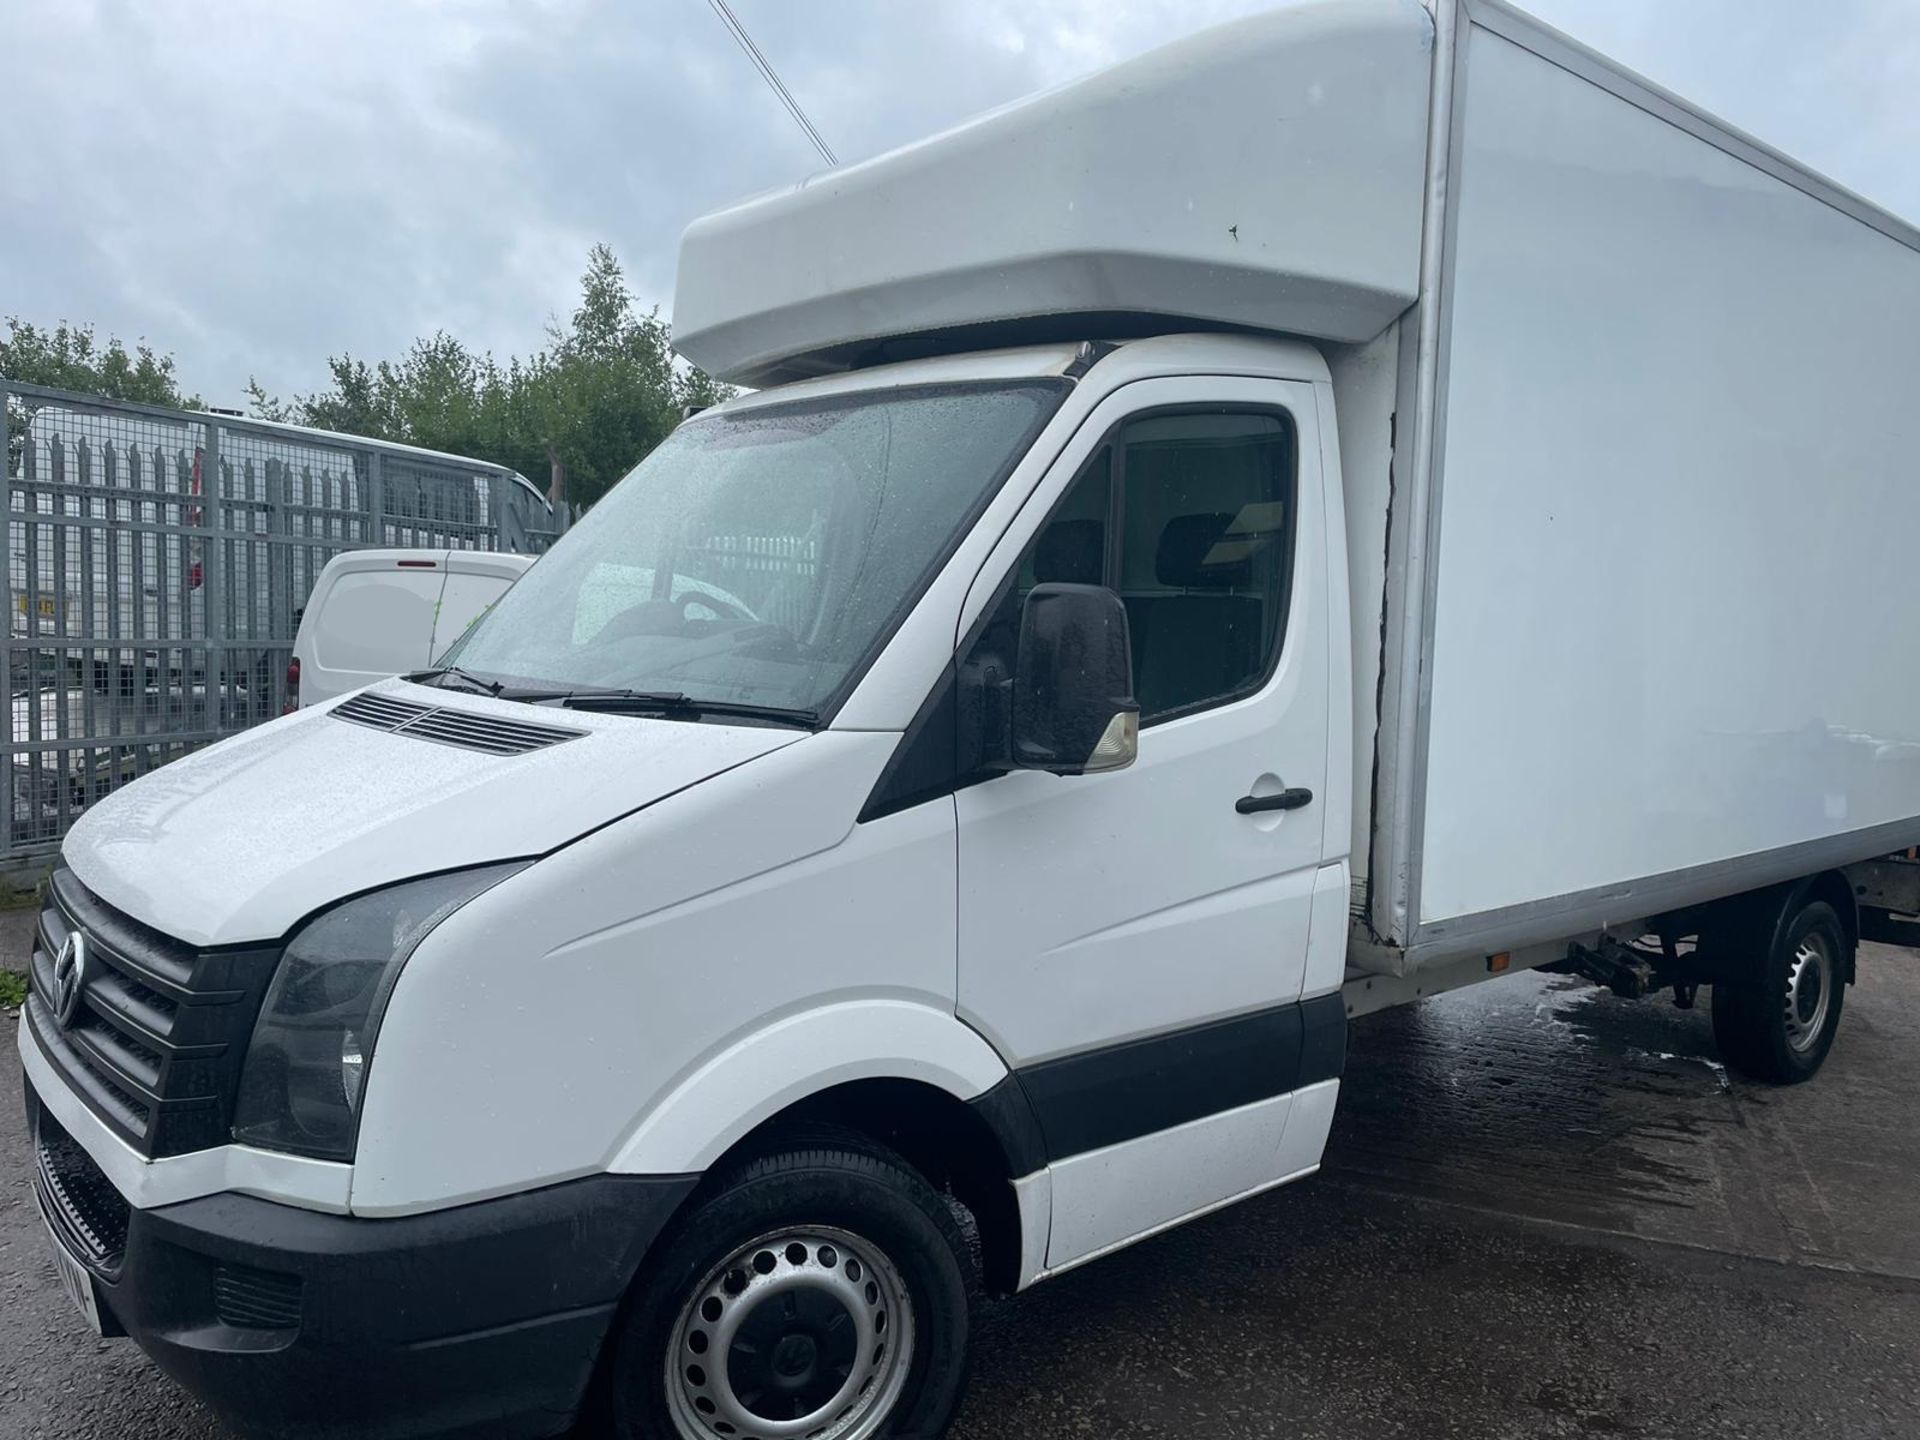 2015 VOLKSWAGEN CRAFTER LUTON VAN WITH TAIL LIFT - 2.0 TDI ENGINE - 144,876 MILES - Image 2 of 9